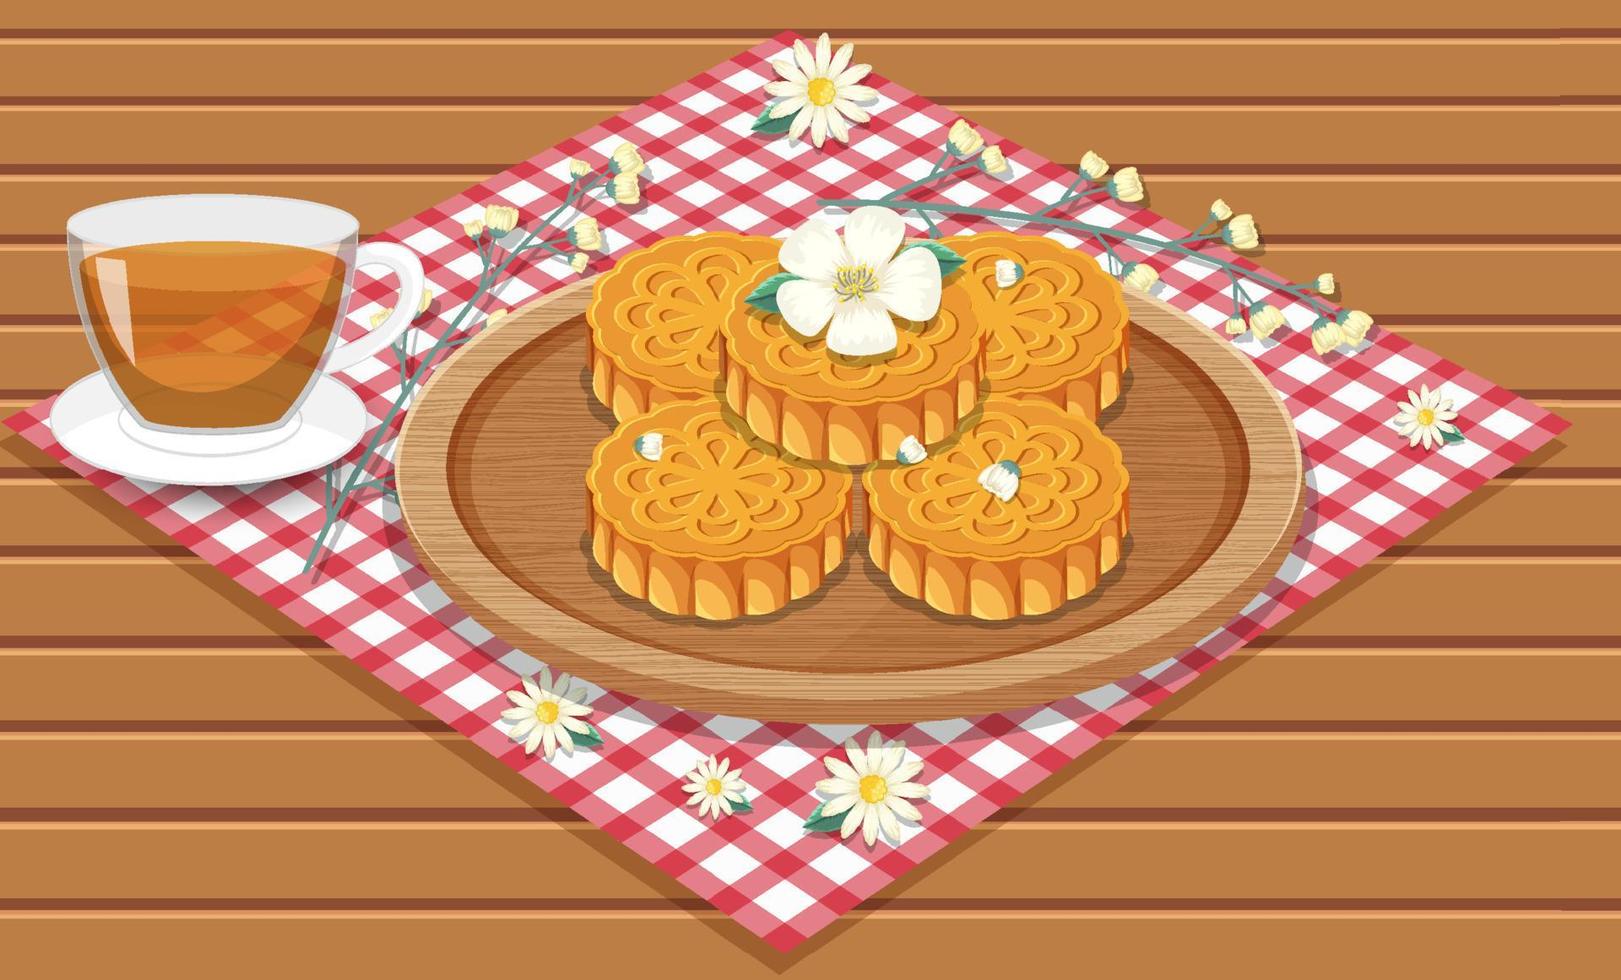 Pile of mooncakes with teacup set on wooden table vector